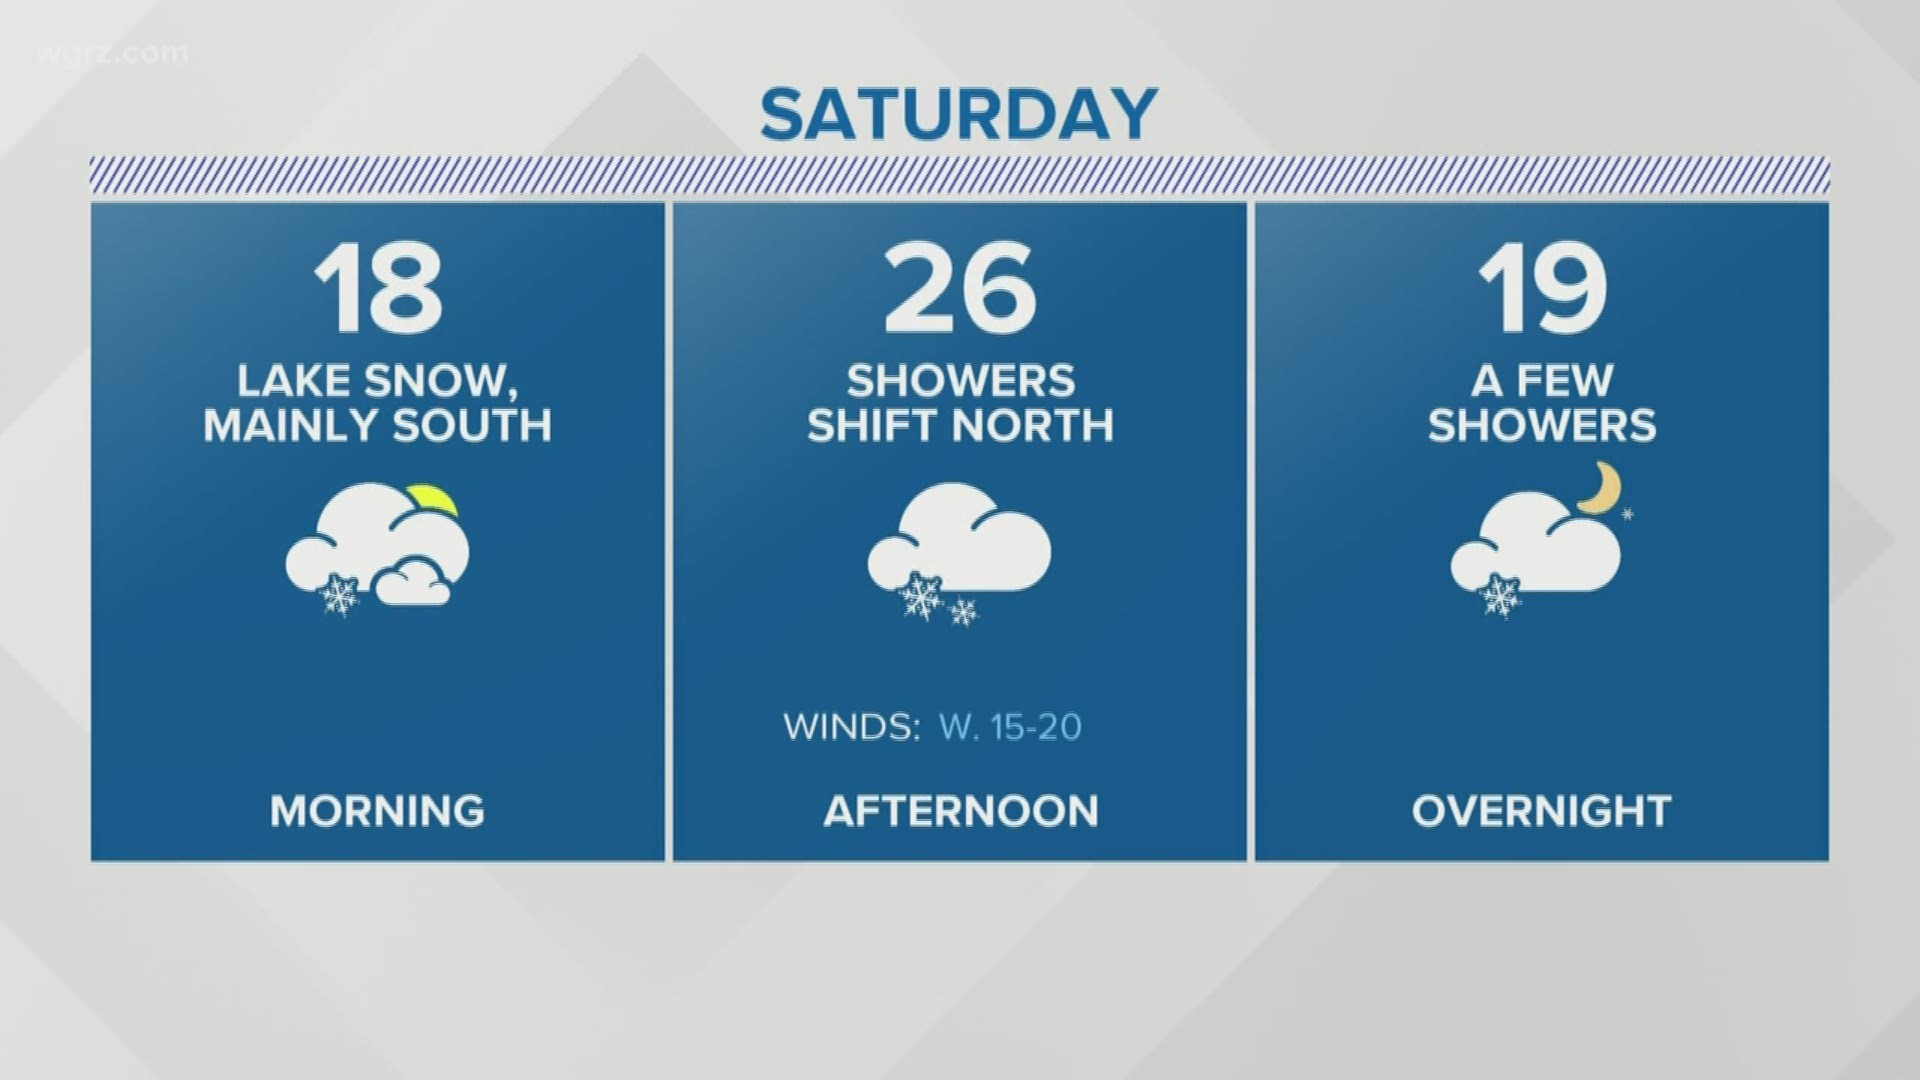 Lake effect snow warnings and winter weather advisories will expire at 10 a.m. tomorrow, but keep in mind there could still be some light snow through the weekend.